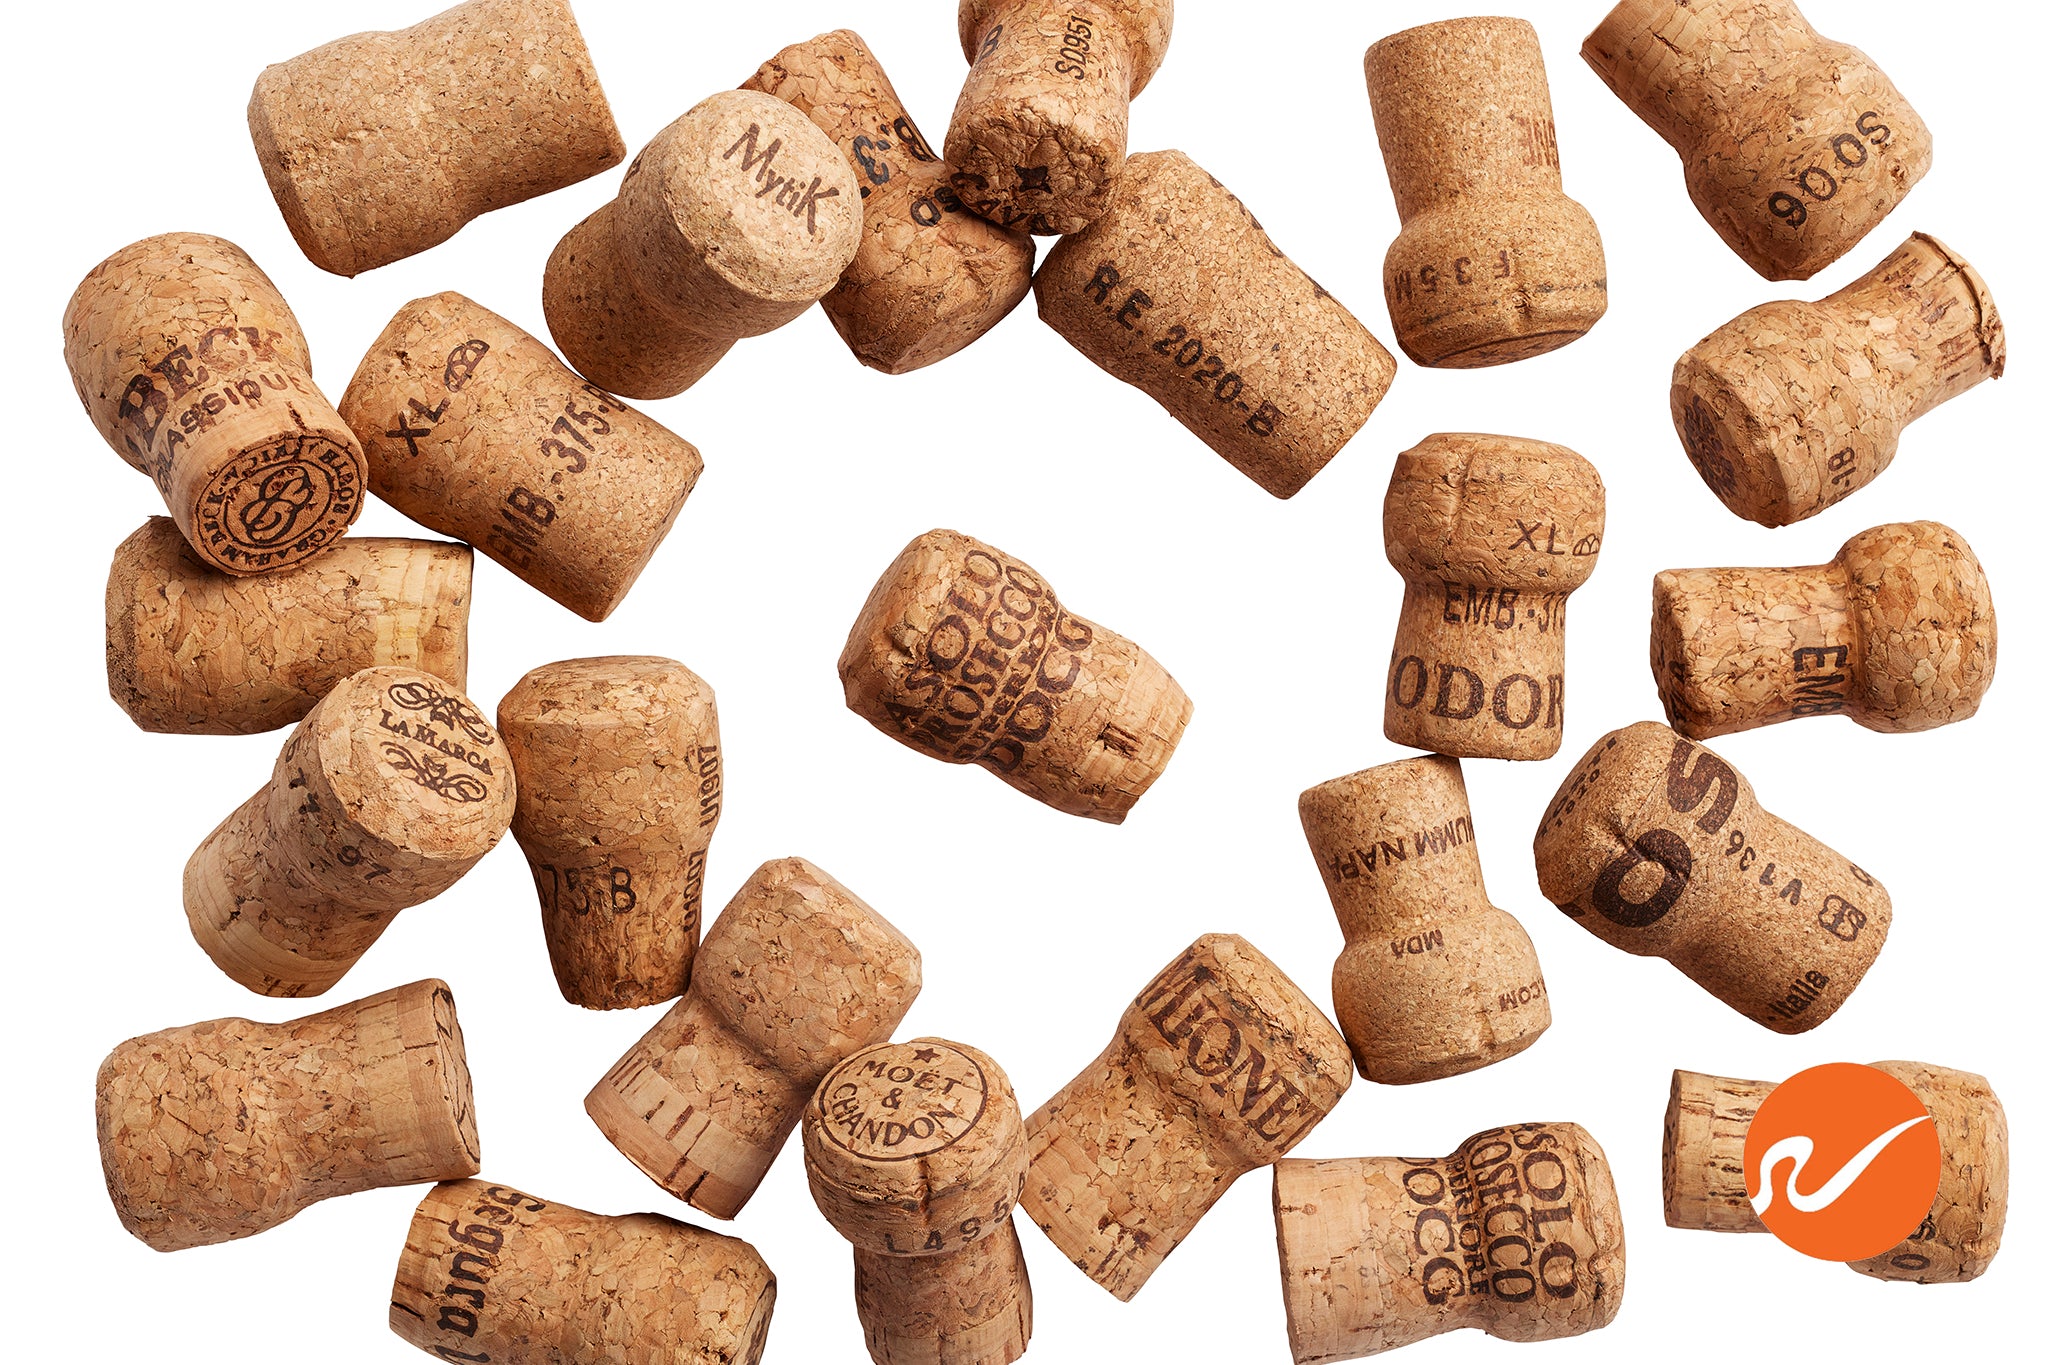 Champagne Corks, Cork, All Natural Corks, Recycled Used Corks, Corks  Crafts, Wedding Decorations, Wine Party, Sparkling Wine